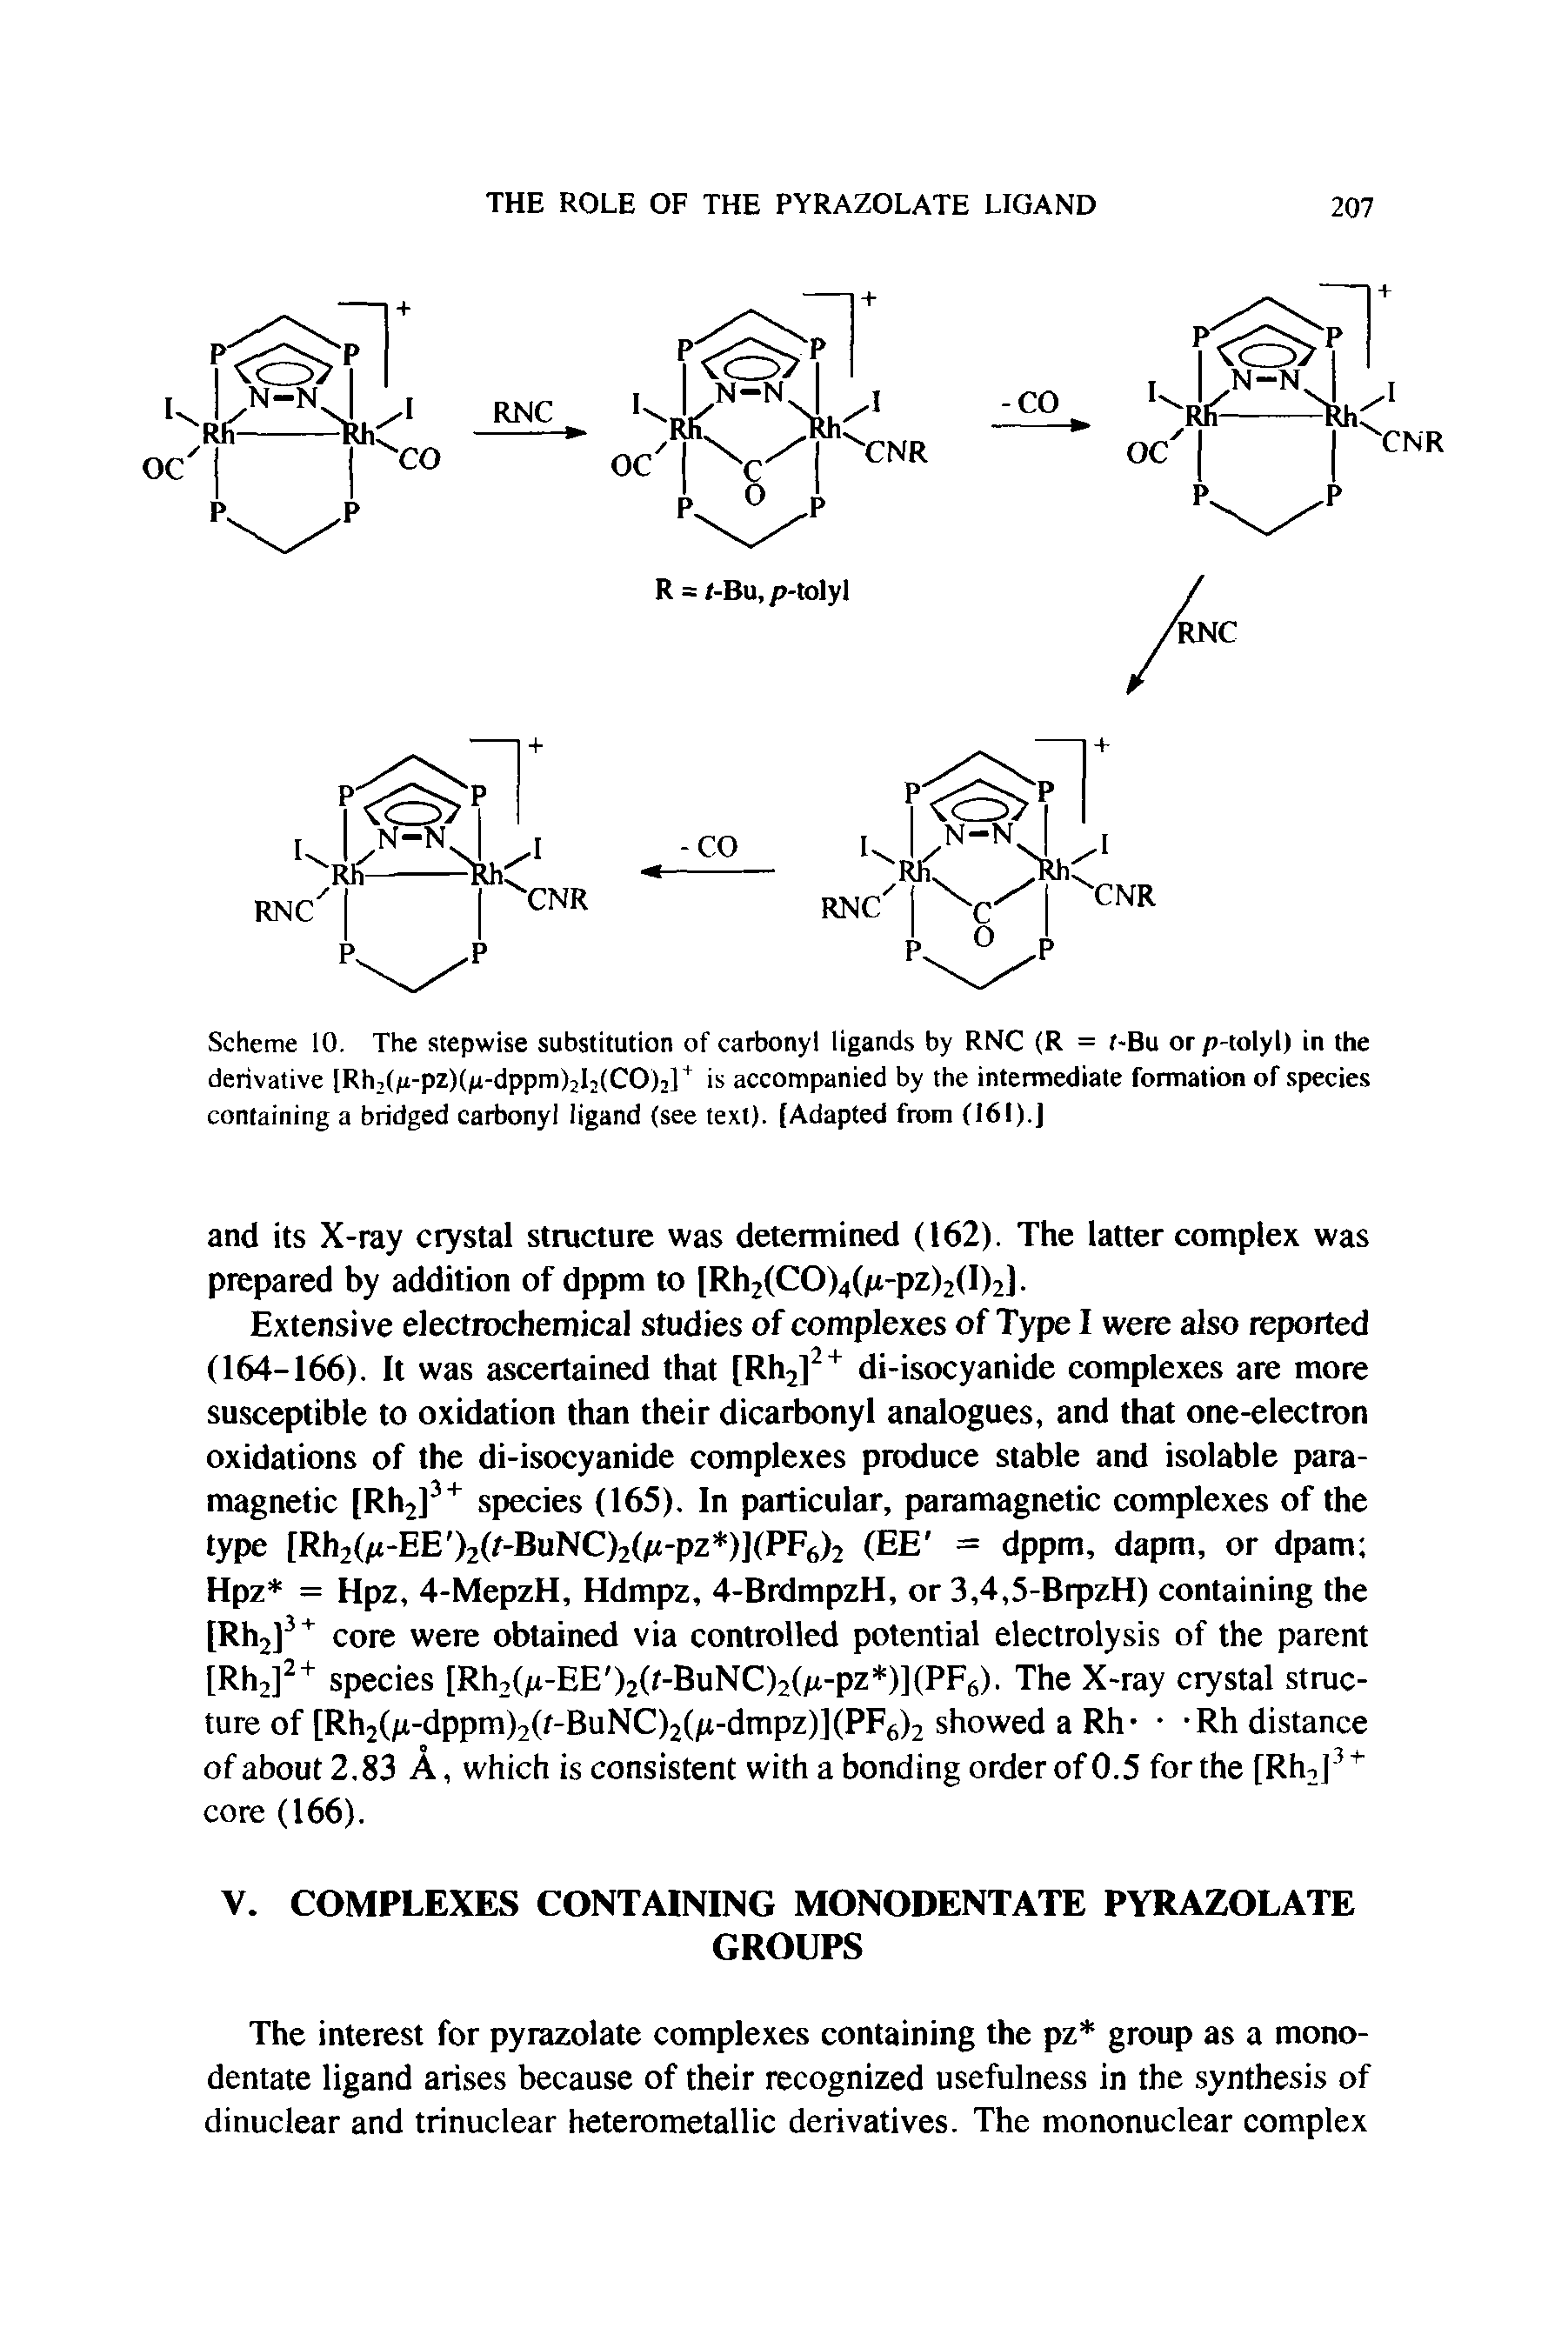 Scheme 10. The stepwise substitution of carbonyl ligands by RNC (R = f-Bu or p-tolyl) in the derivative [Rh2(/i-pz)(/j-dppm)2I2(CO)2l1 is accompanied by the intermediate formation of species containing a bridged carbonyl ligand (see text). [Adapted from (161).]...